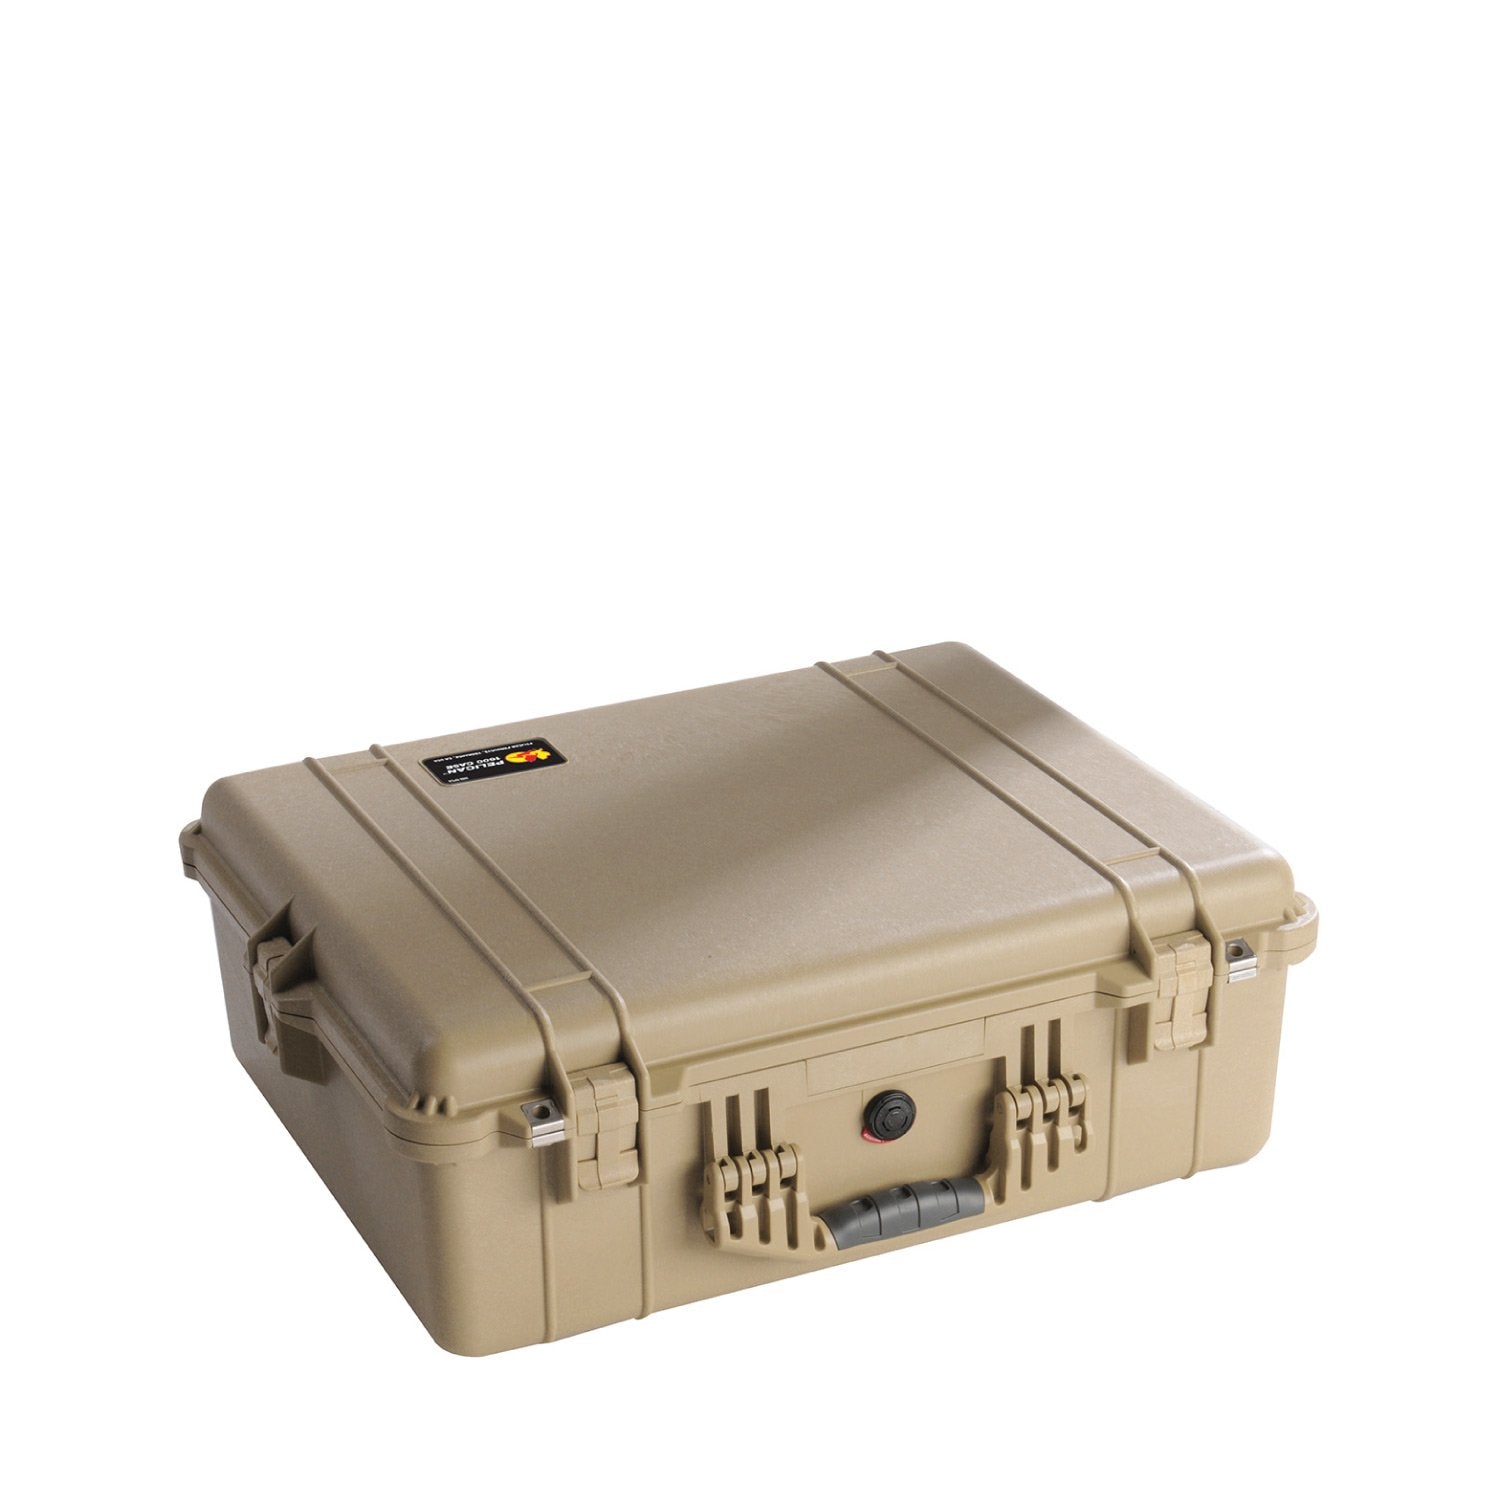 Pelican 1600 Classic Large Hard Case Desert Tan Bags, Packs and Cases Pelican Products Without Foam Tactical Gear Supplier Tactical Distributors Australia